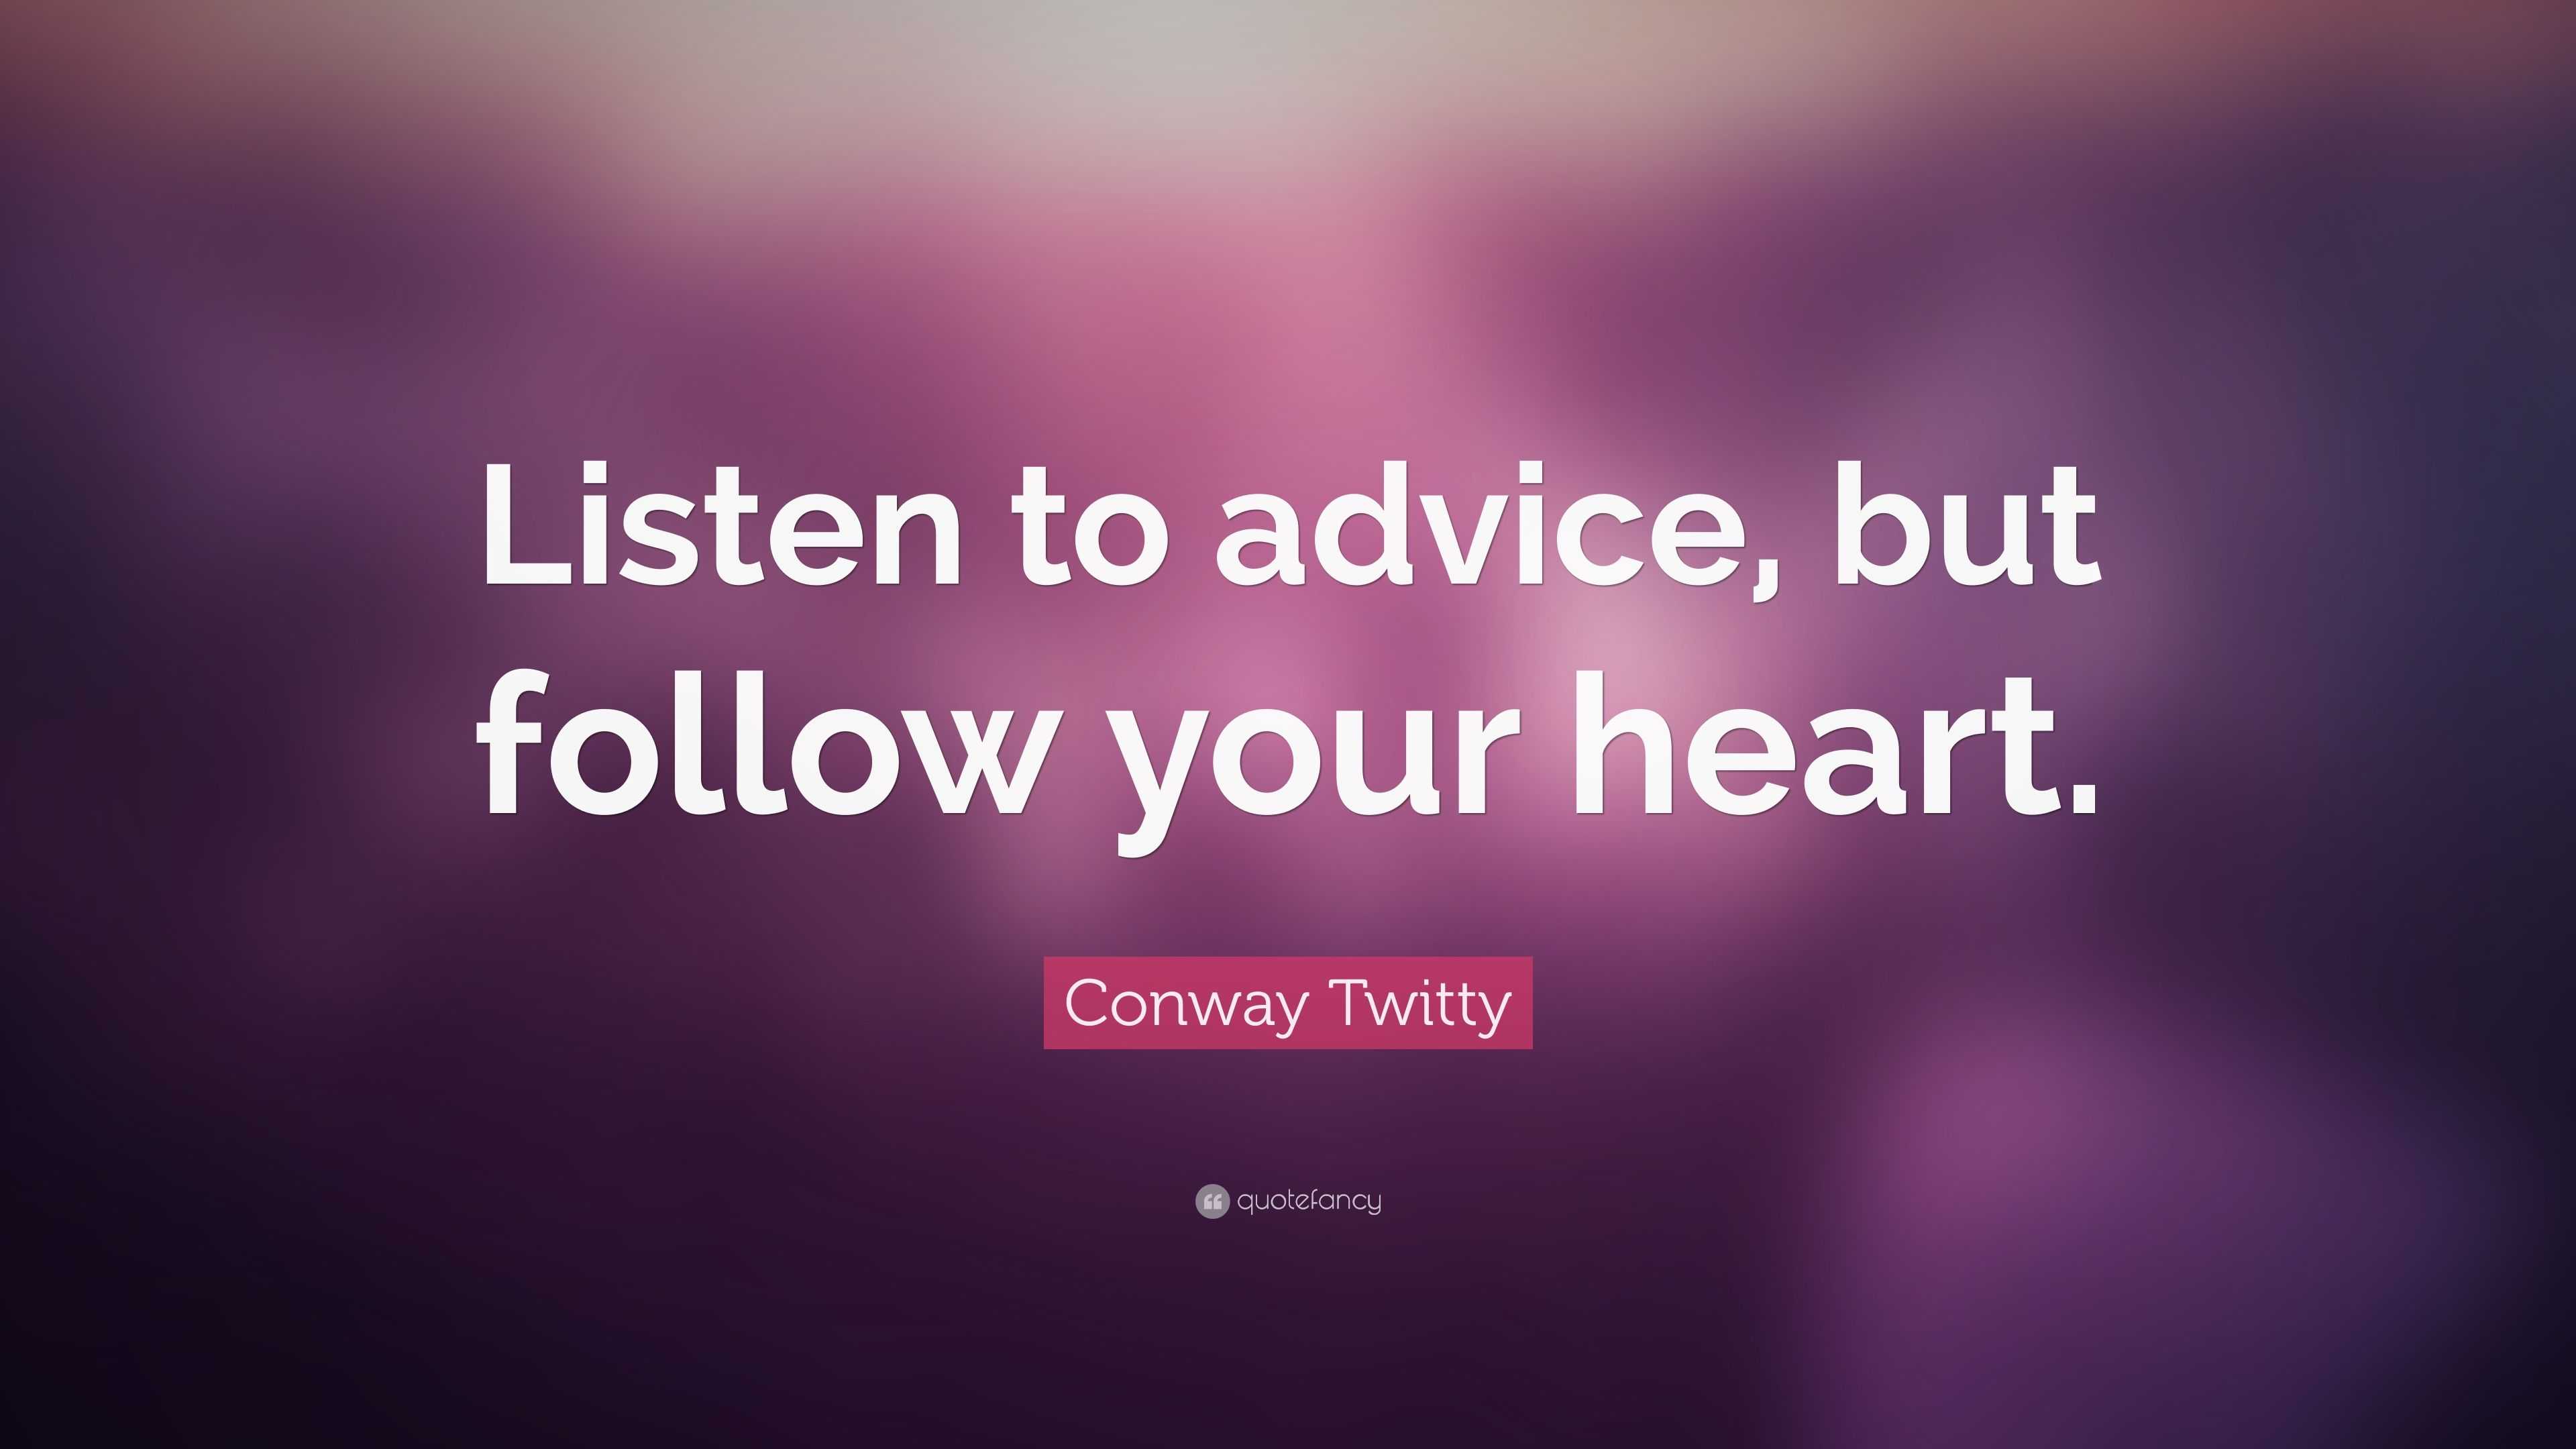 Conway Twitty Quote: “Listen to advice, but follow your heart.”